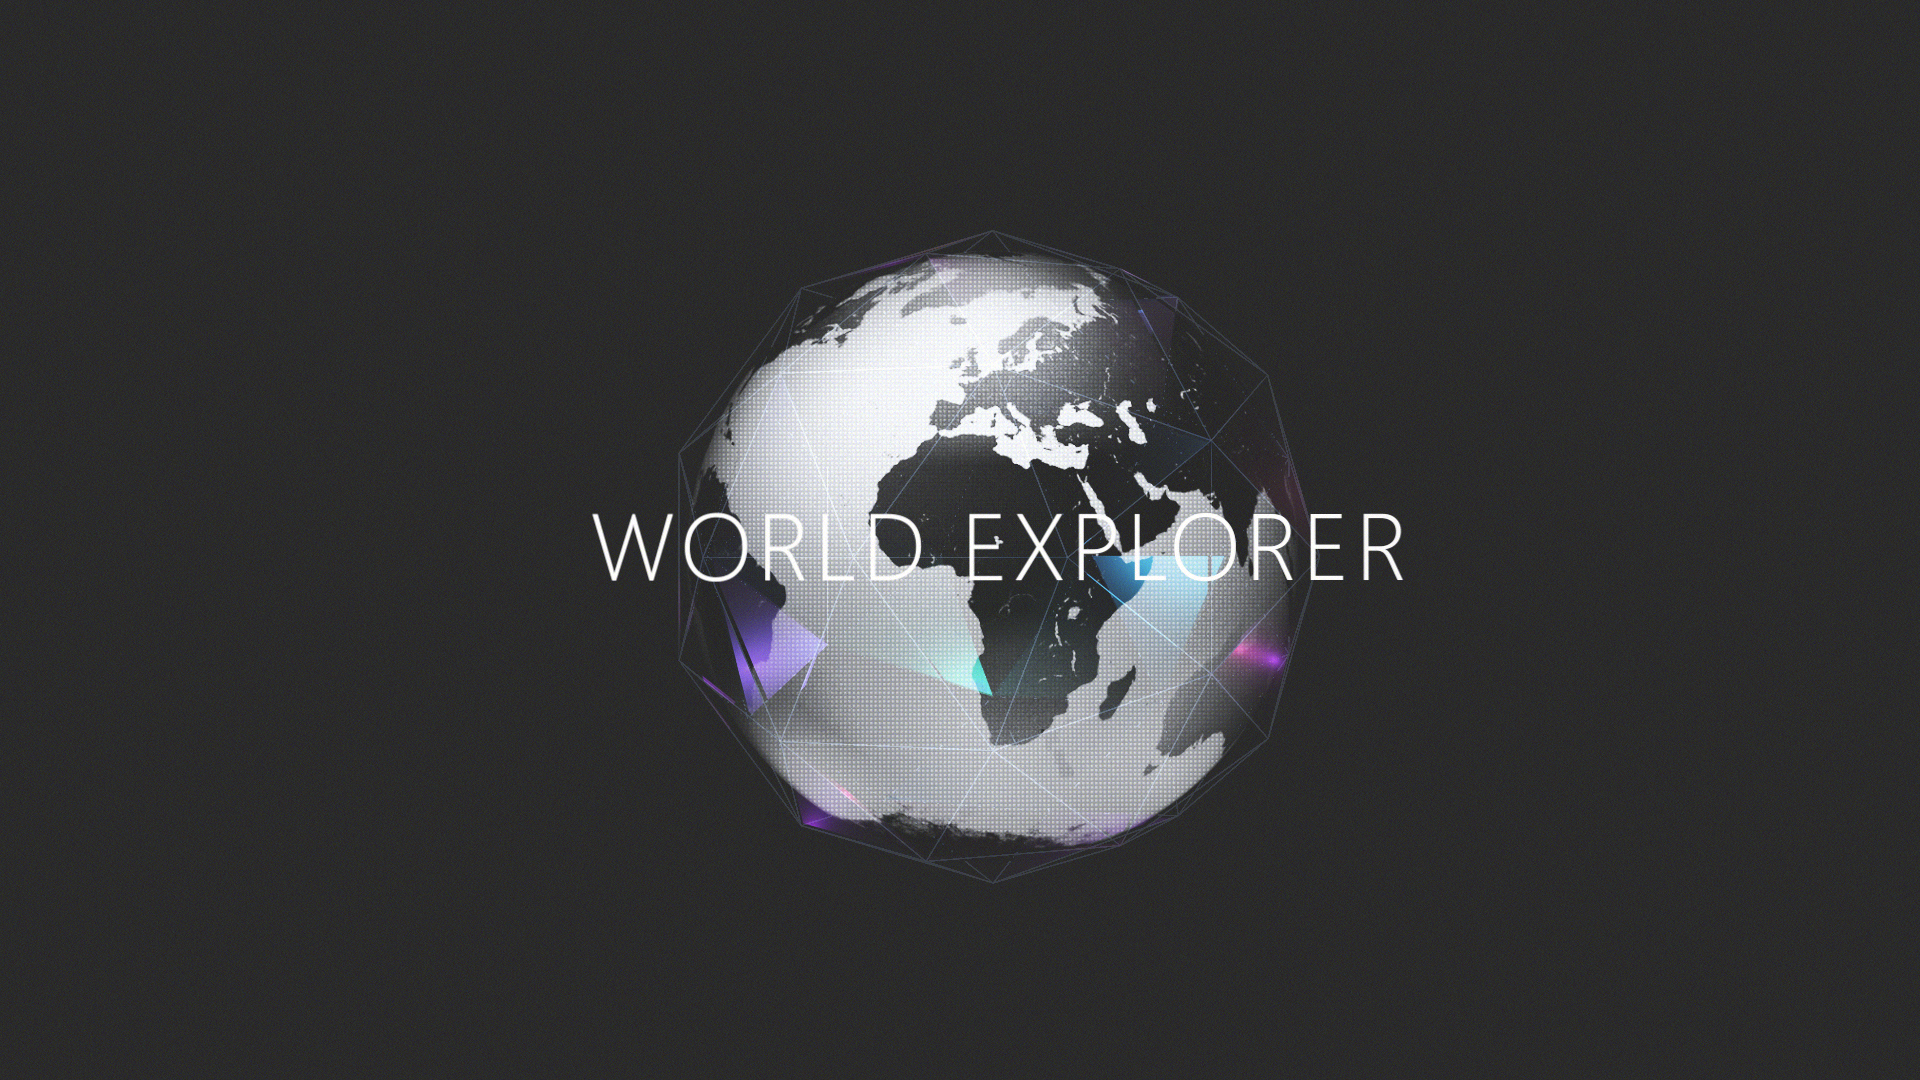  Project "World Explorer" was the name used during my time working on the project as a result many of my visuals below still reflect that name. 